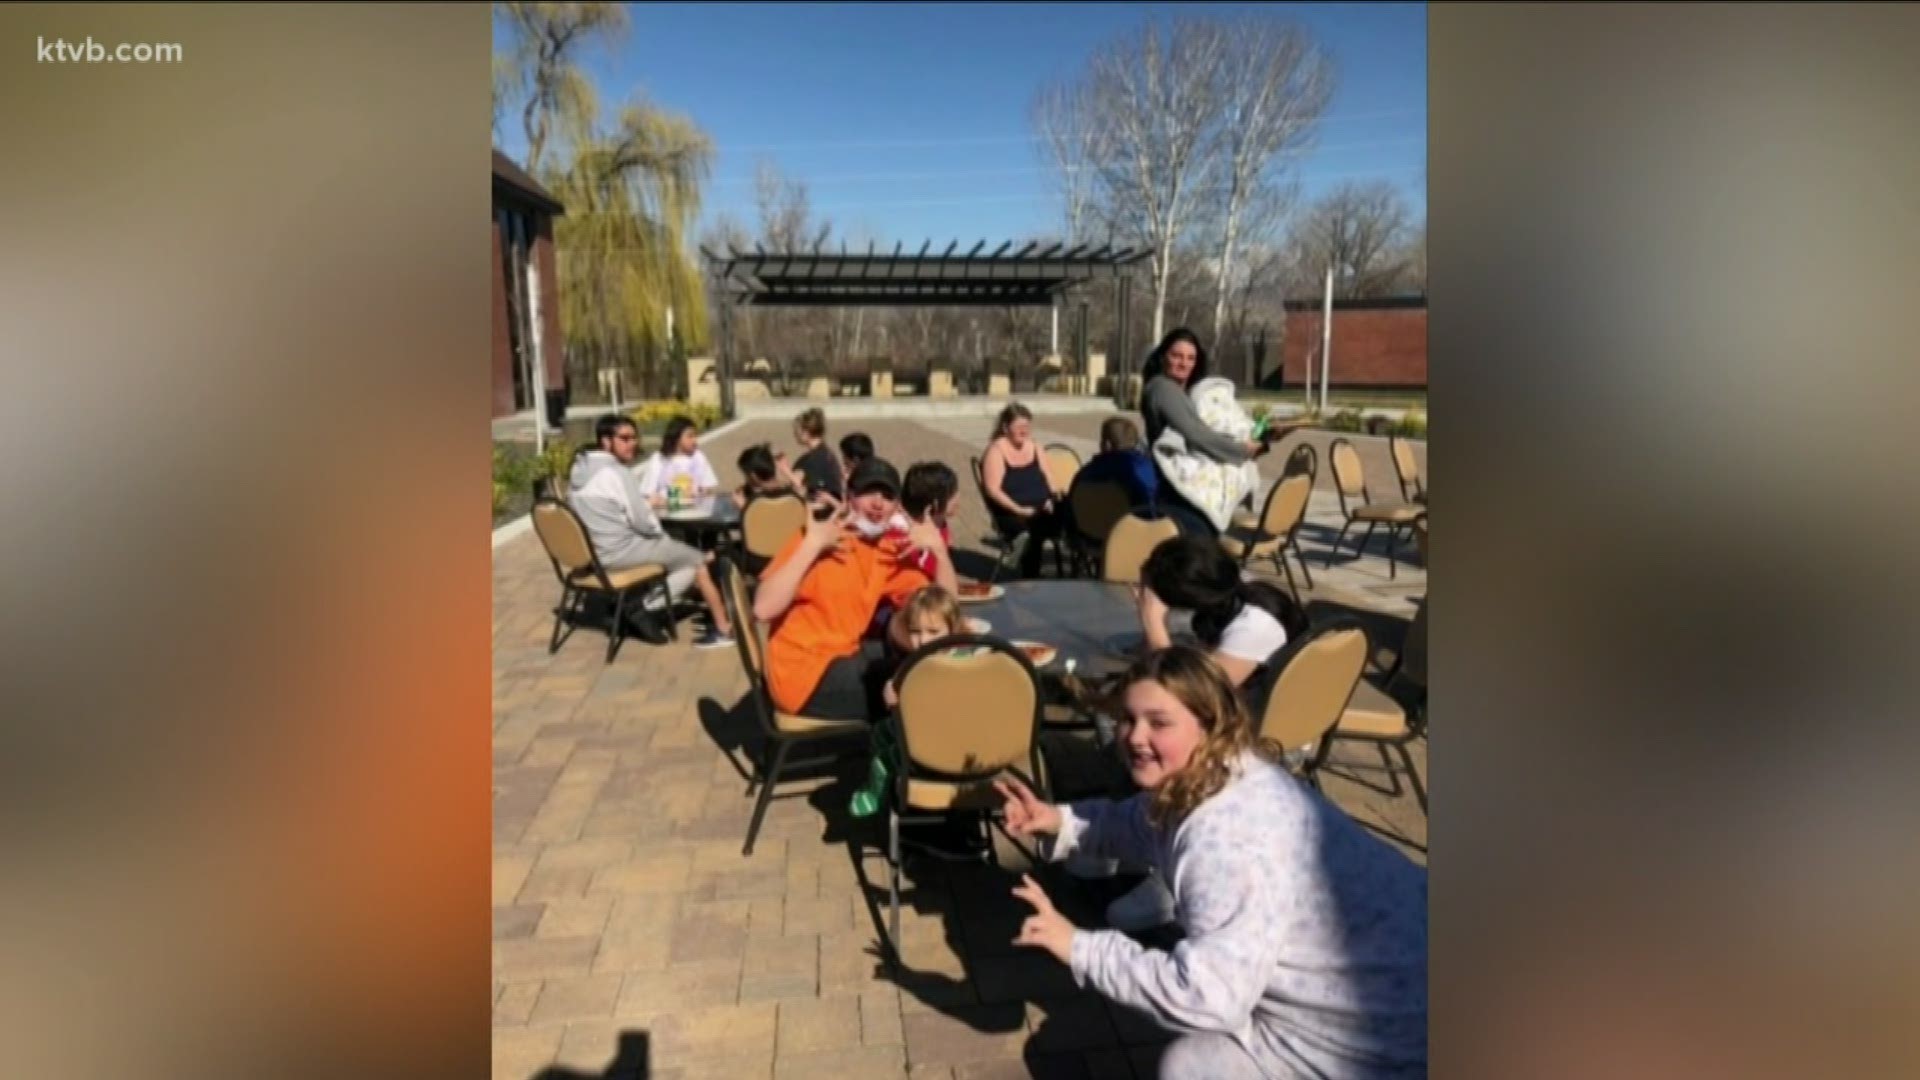 For 30 families, this Garden City hotel along the Boise River is giving people a new sanctuary while keeping the hotel busy.